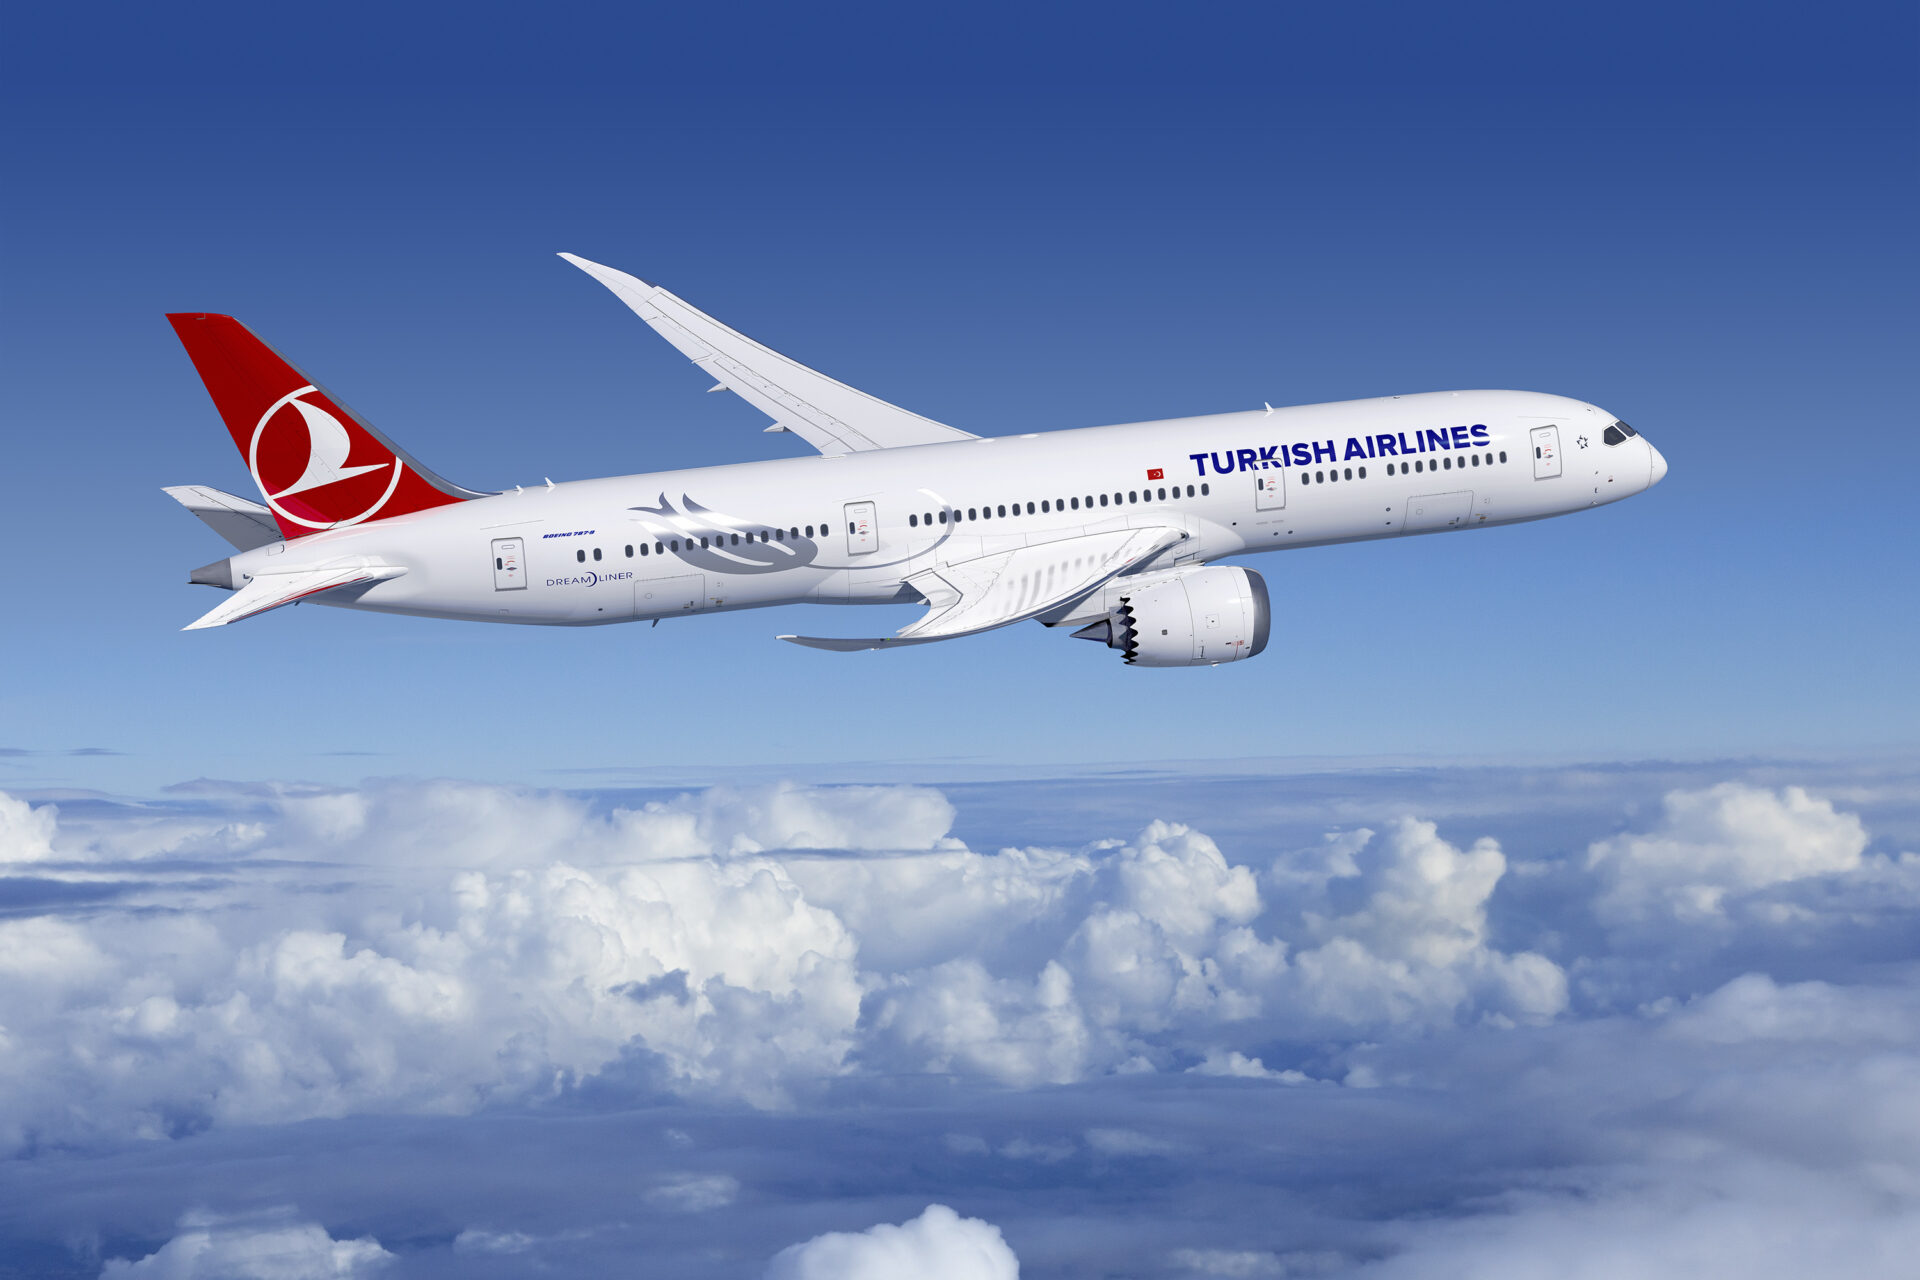 Antalya is now one direct flight away thanks to Turkish Airlines